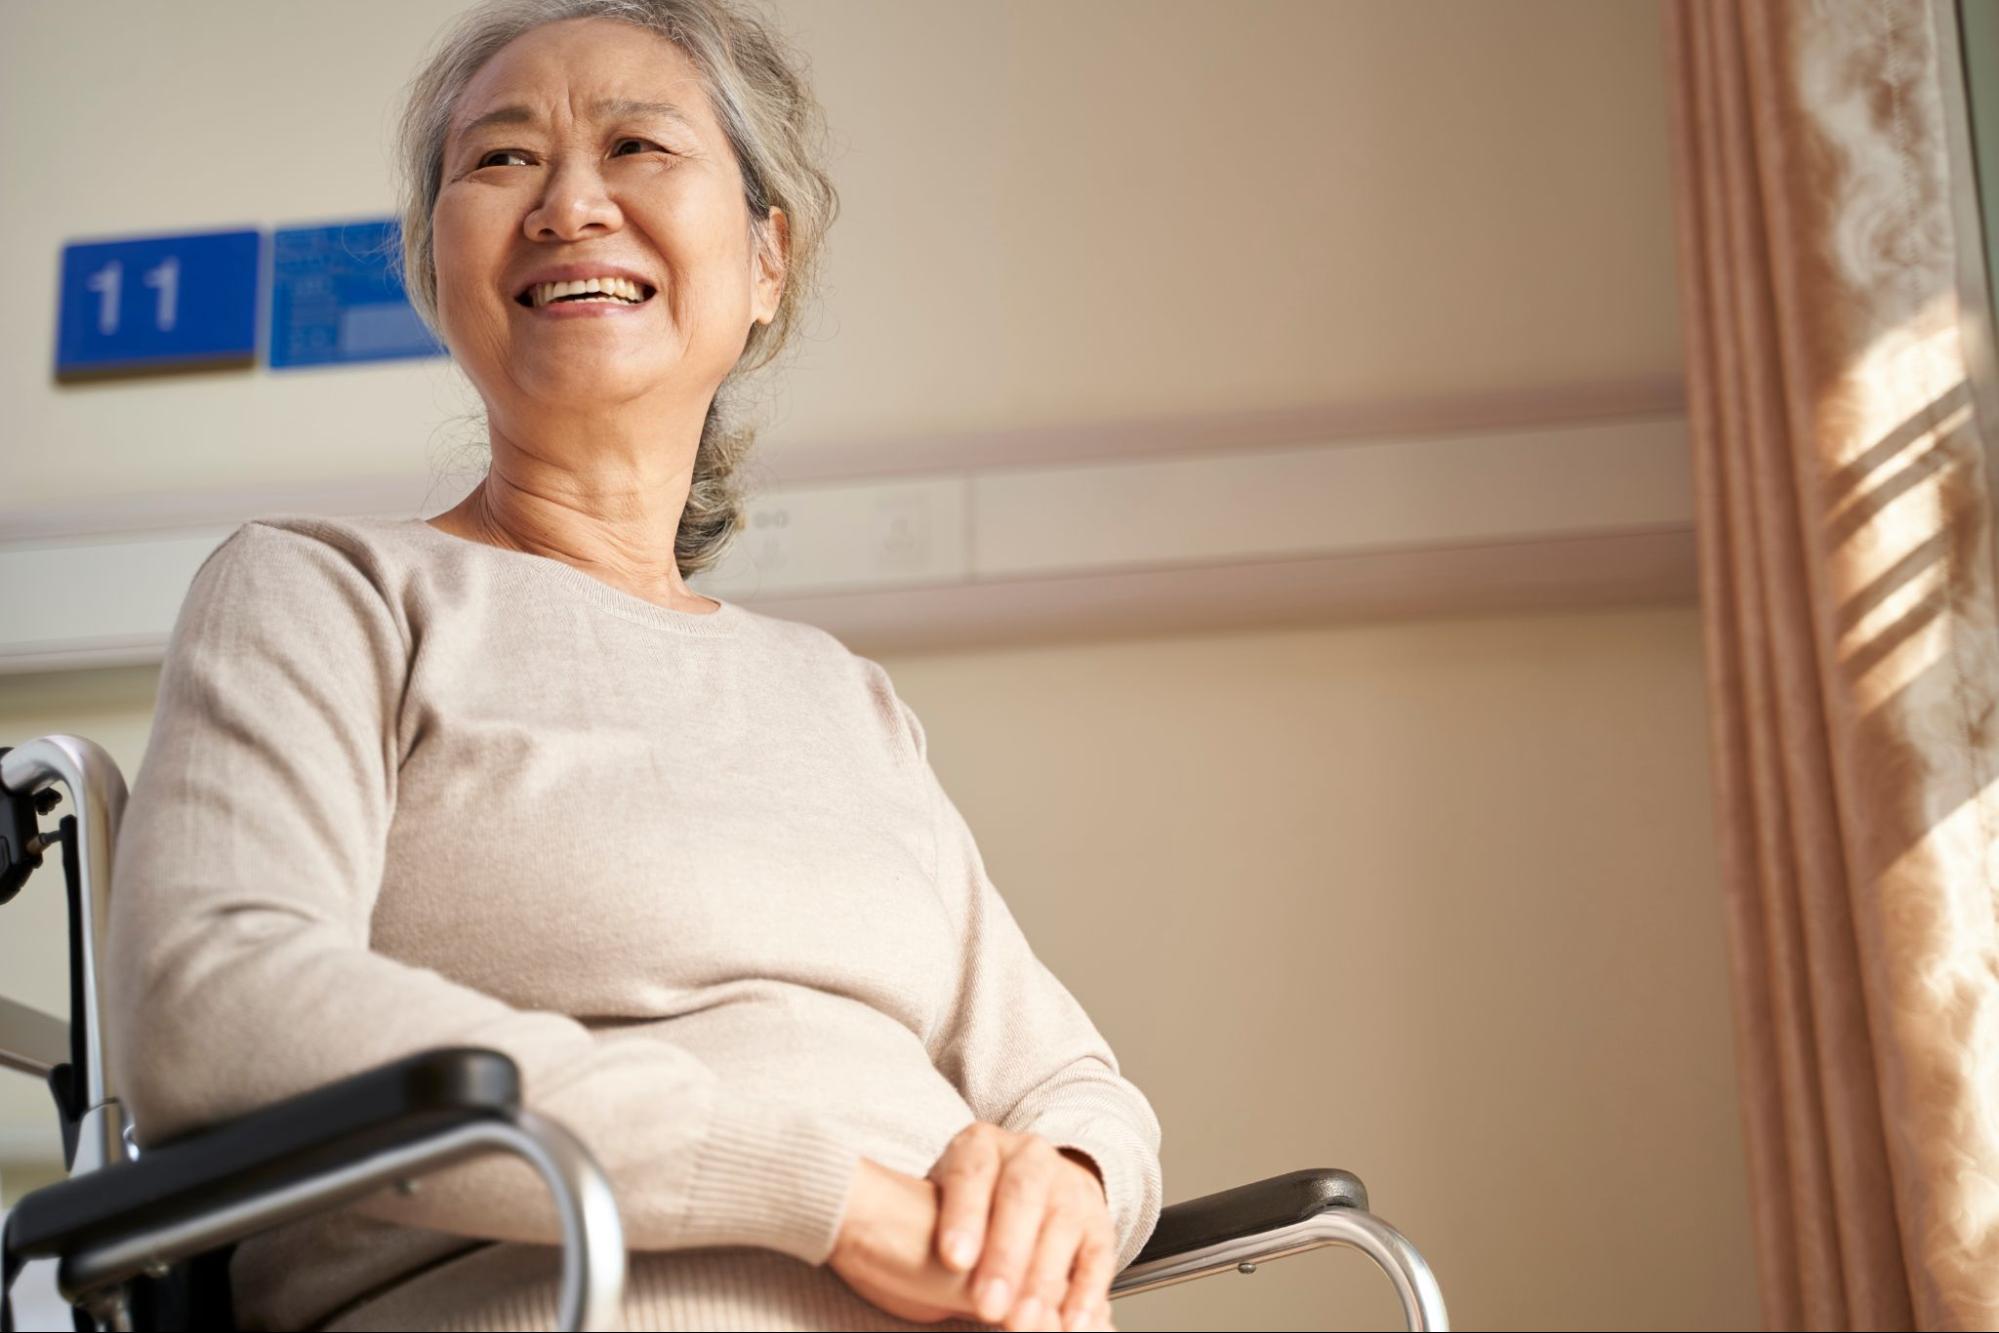 An elderly Asian woman with grey hair smiling warmly while sitting in a wheelchair, indoors by a window with sunlight streaming through, and a blue room number sign in the background.